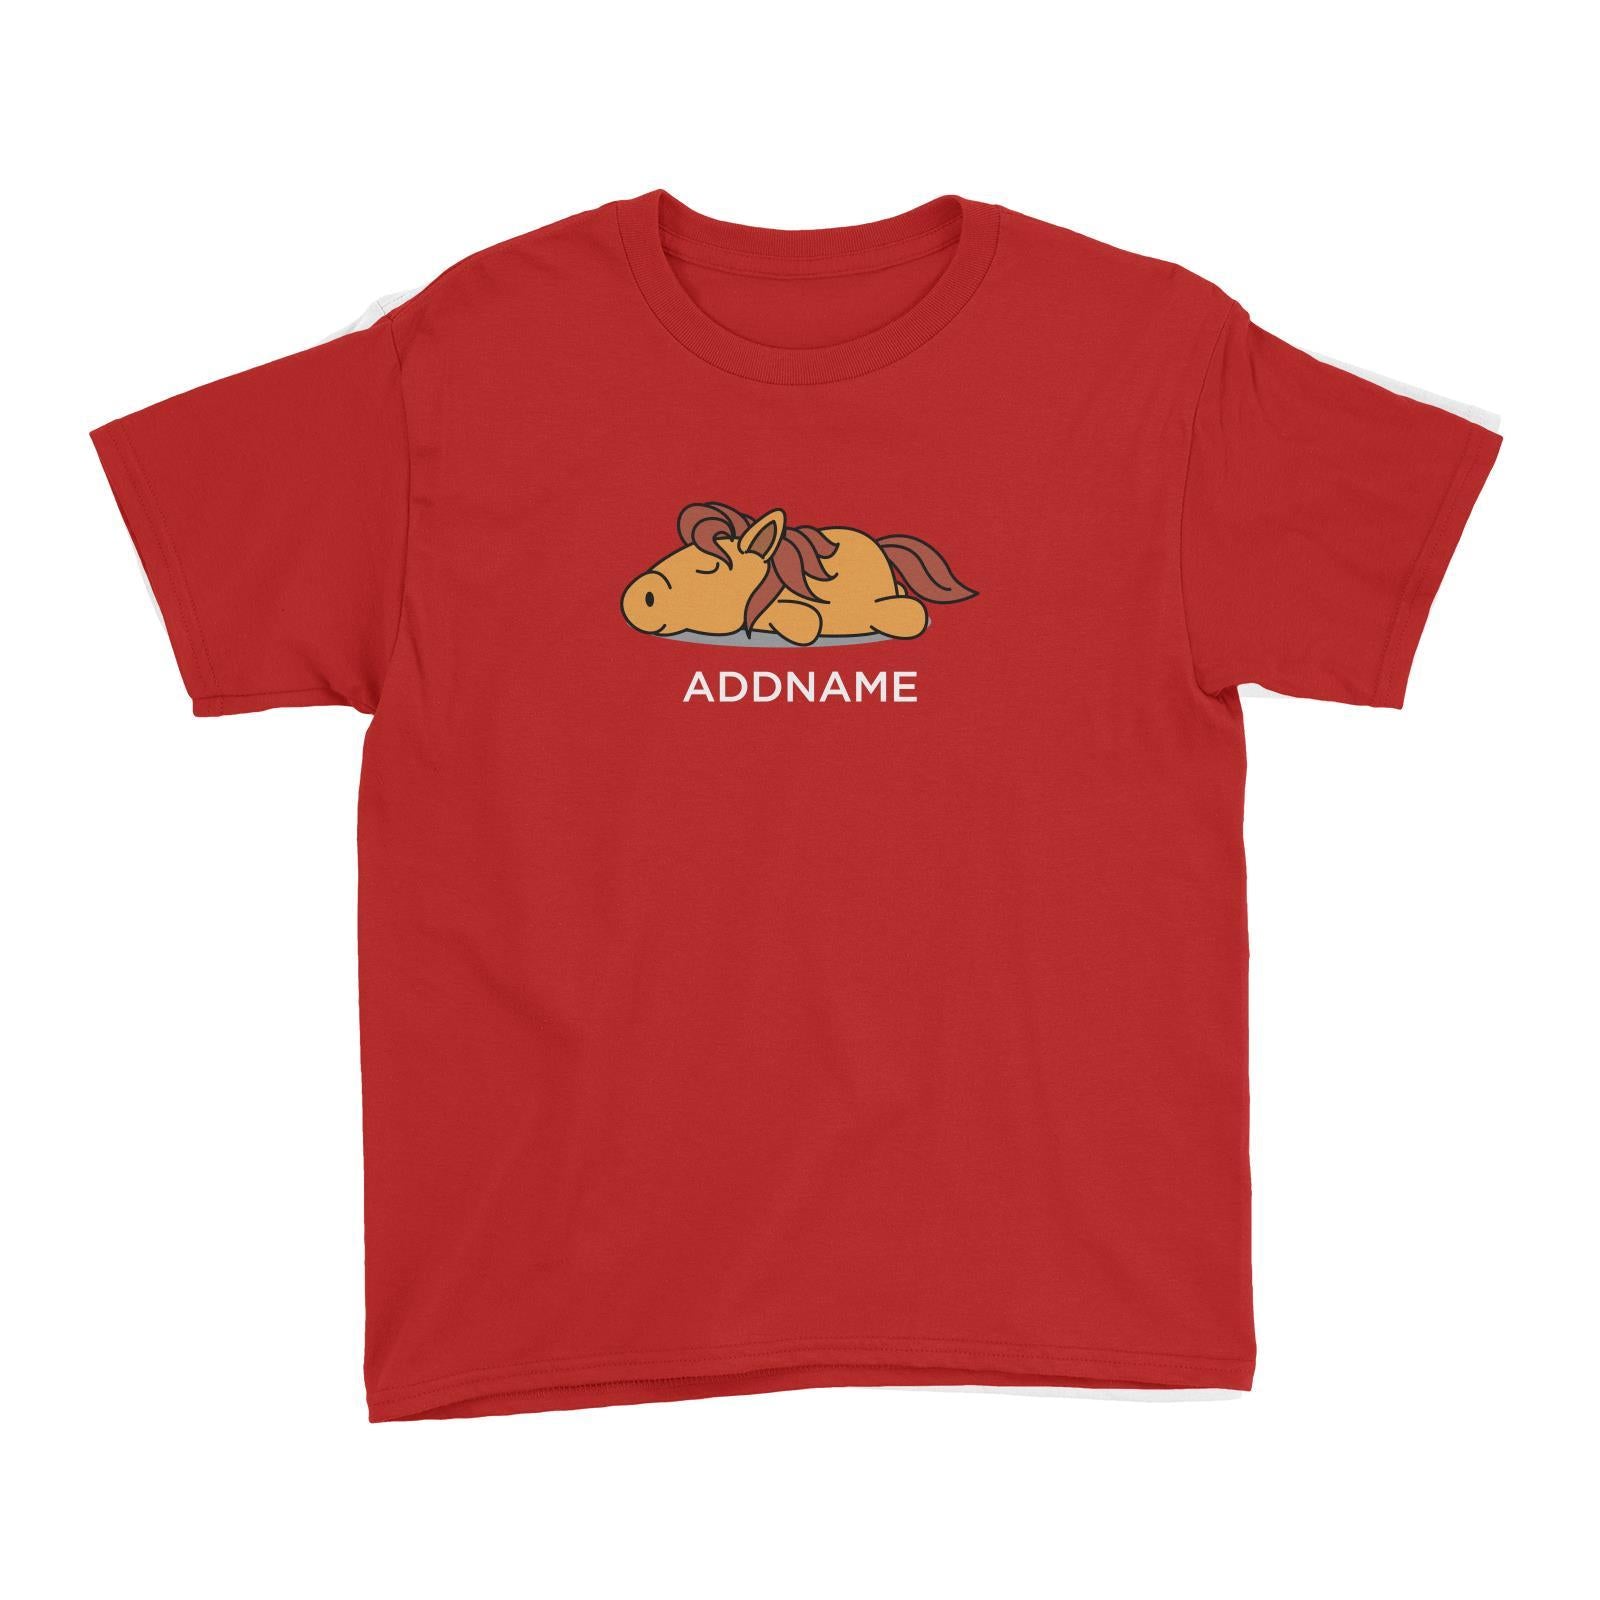 Lazy Horse Addname Kid's T-Shirt